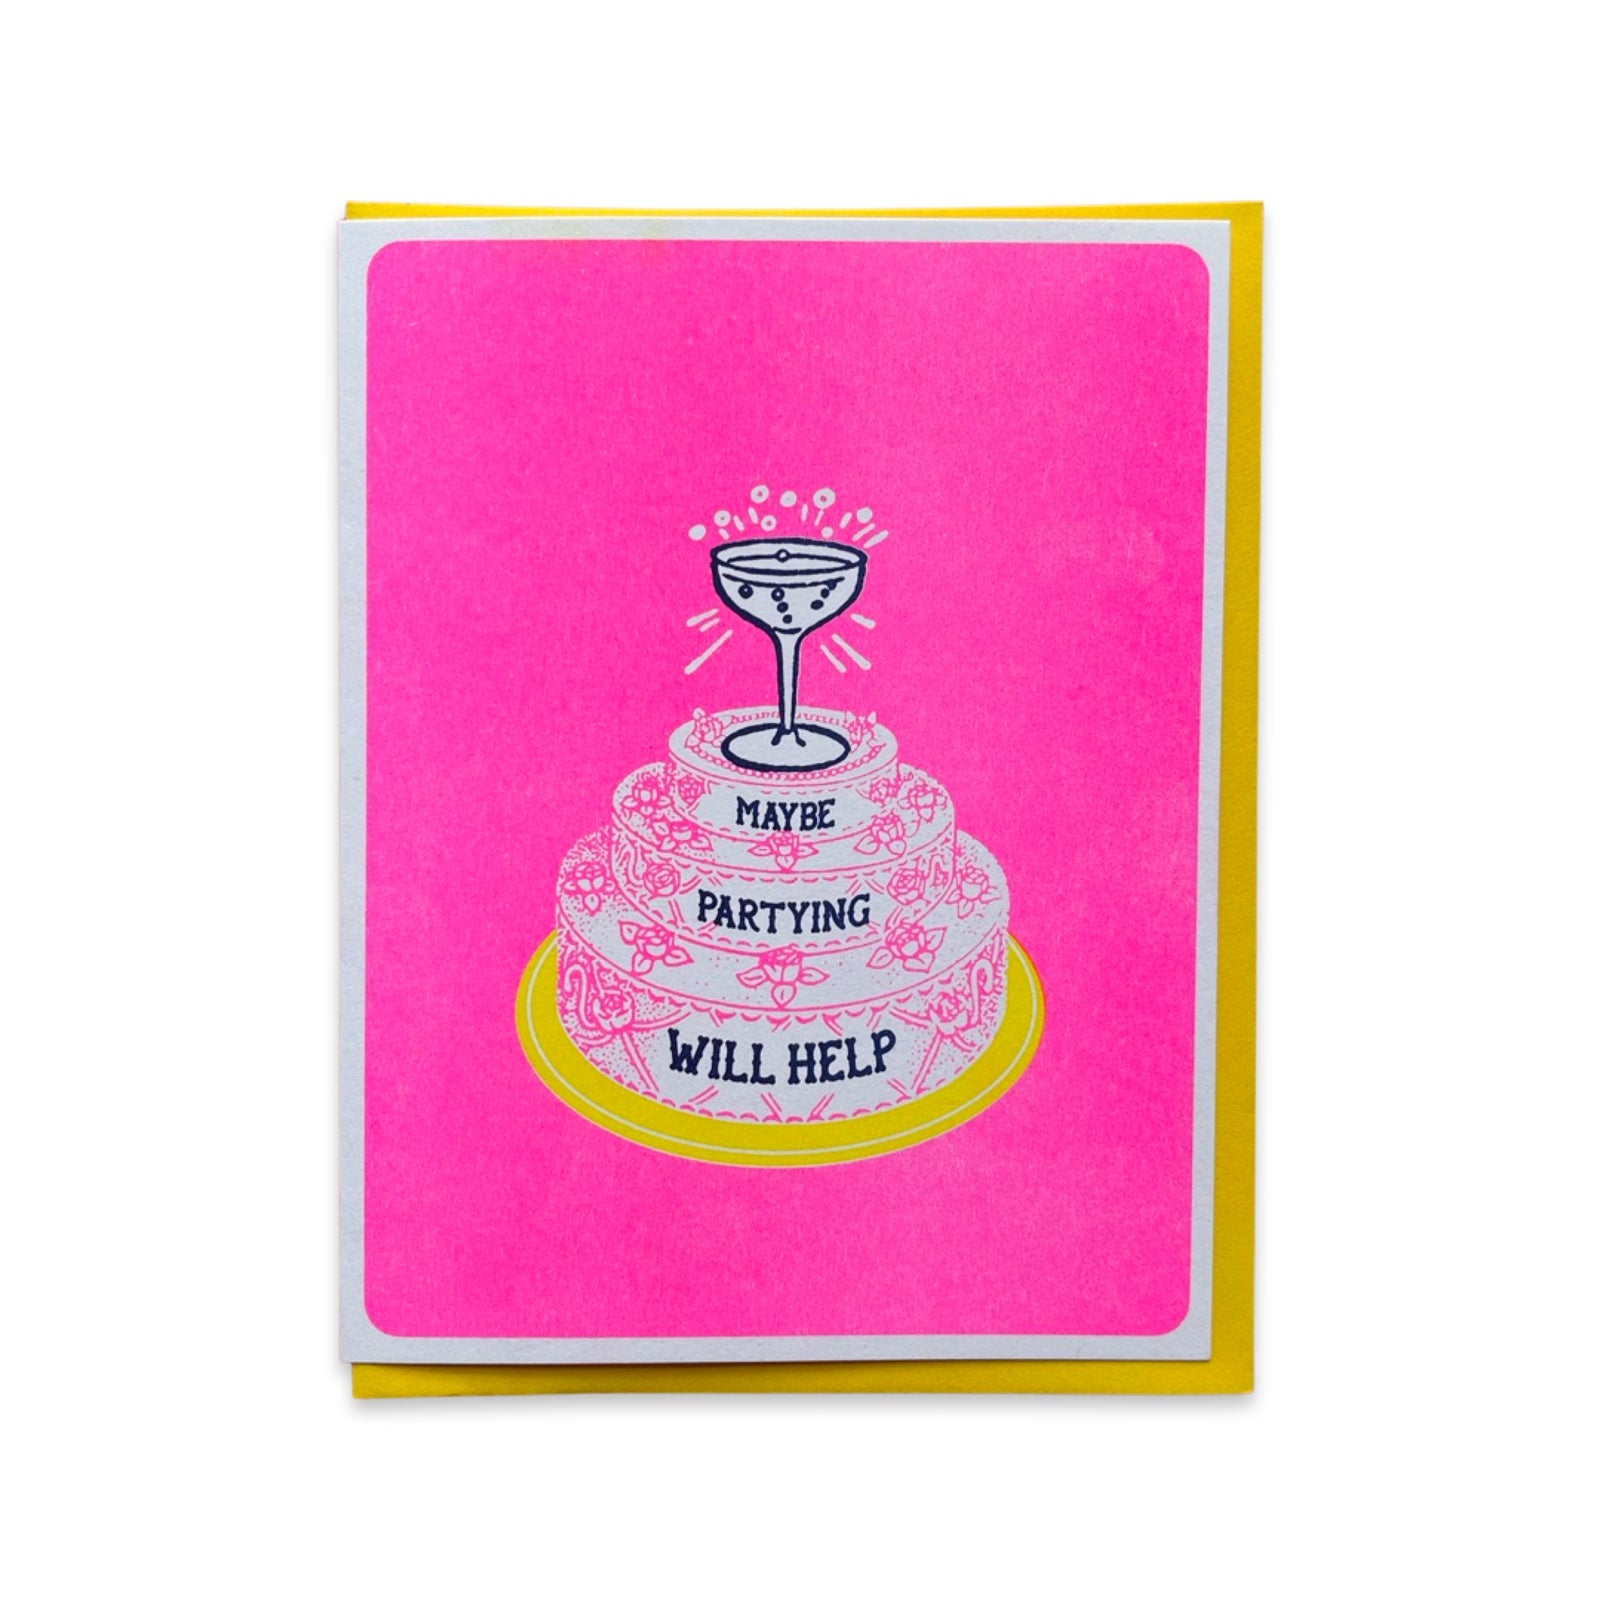 Maybe Partying Will Help Cake Card